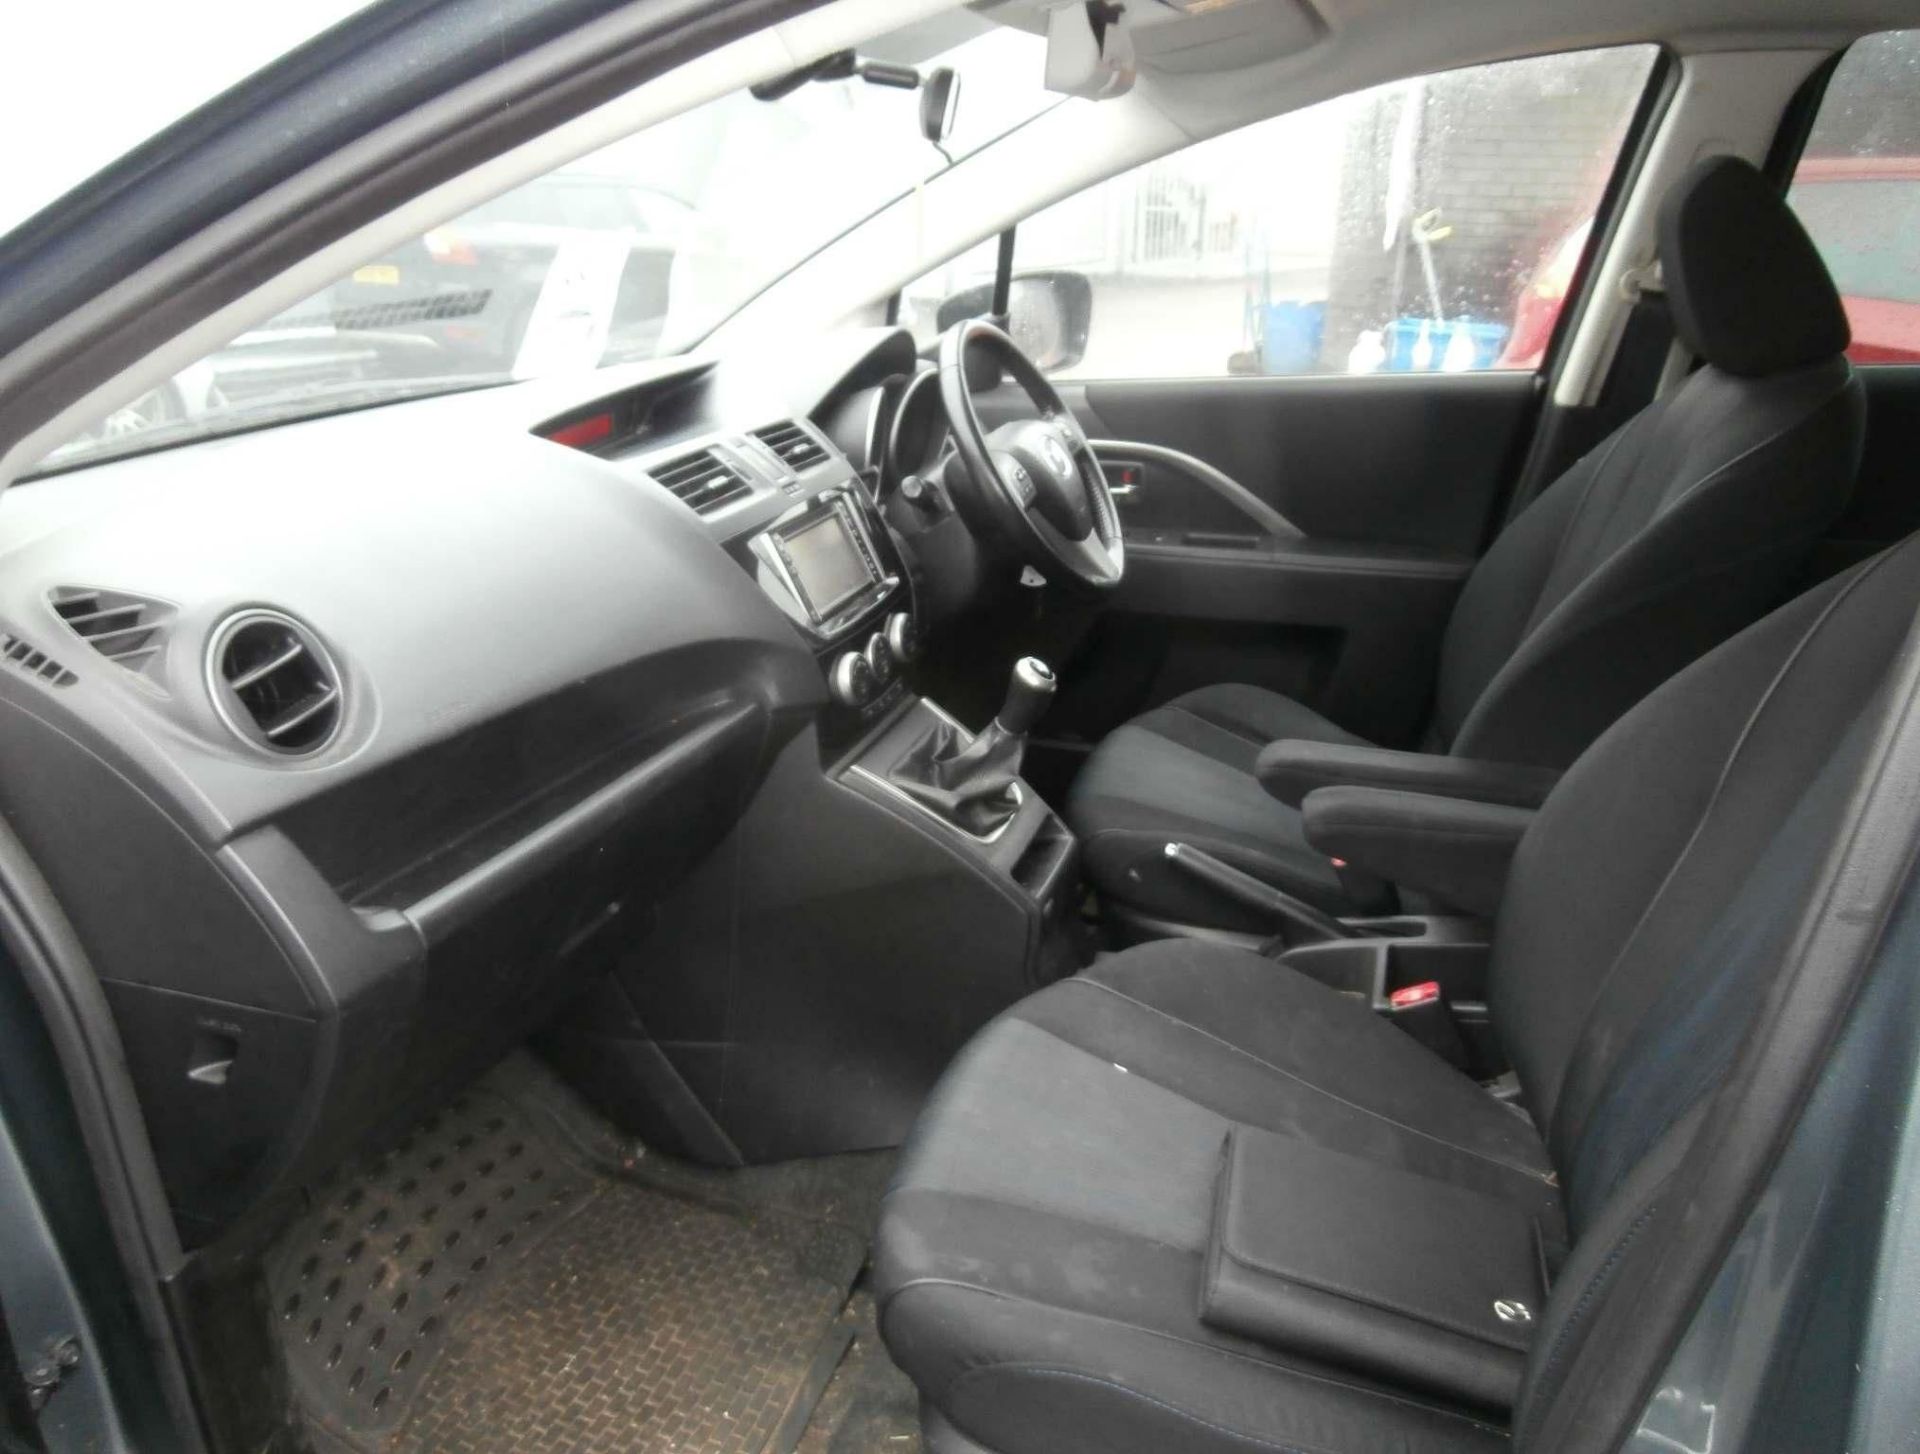 2013 Mazda 5 2.0 Venture Edition 5 Dr MPV - CL505 - NO VAT ON THE HAMMER - Location: Corby, N - Image 6 of 18